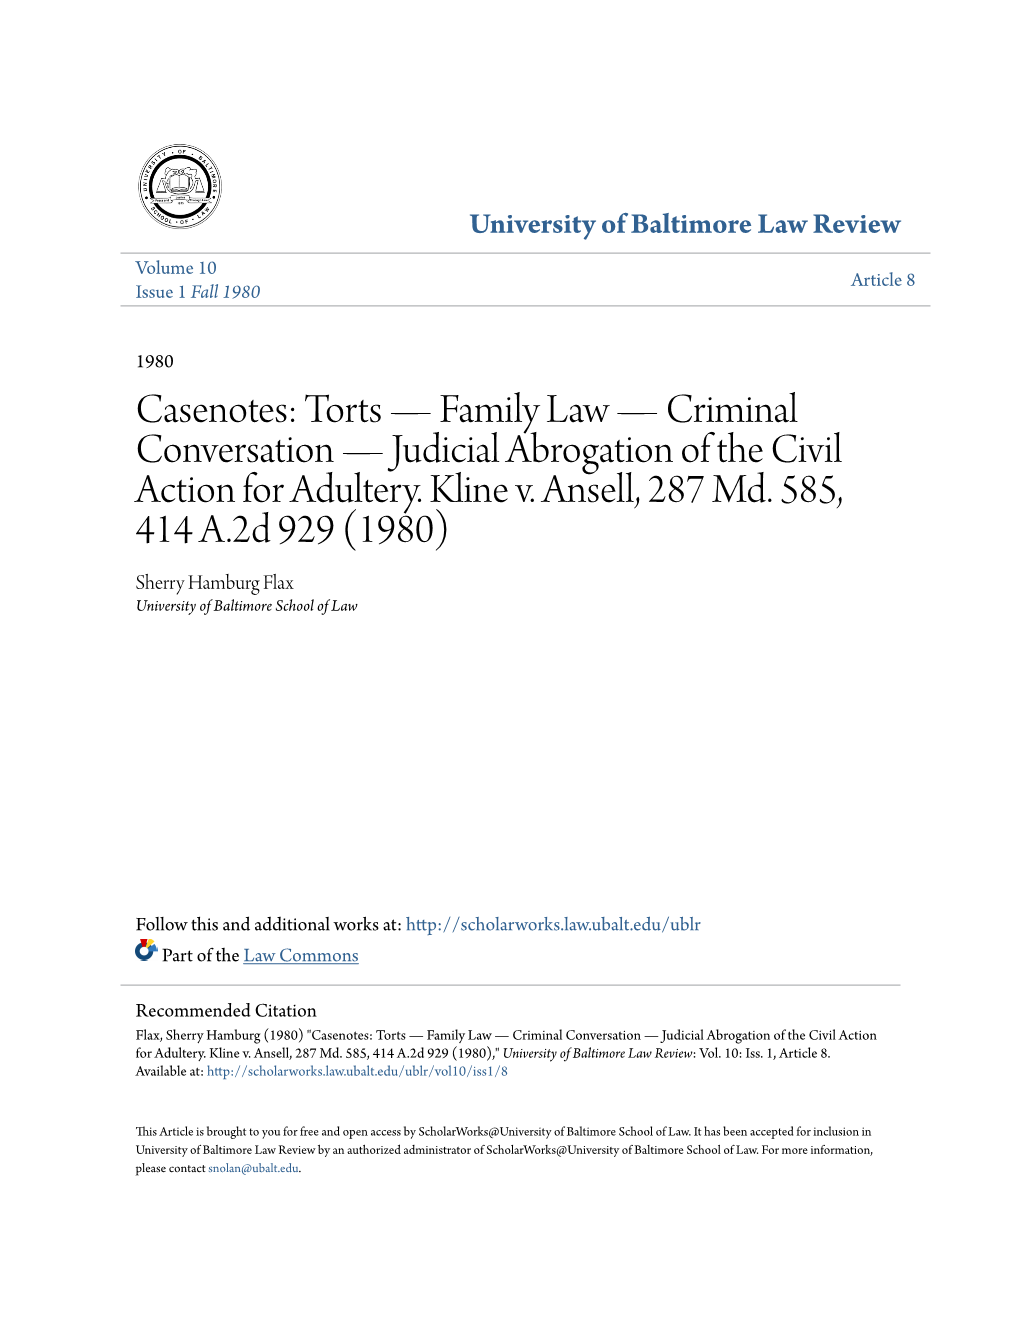 Casenotes: Torts—Family Law—Criminal Conversation—Judicial Abrogation of the Civil Action for Adultery. Kline V. Ansell, 287 Md. 585, 414 A. 2D 929 (1980)